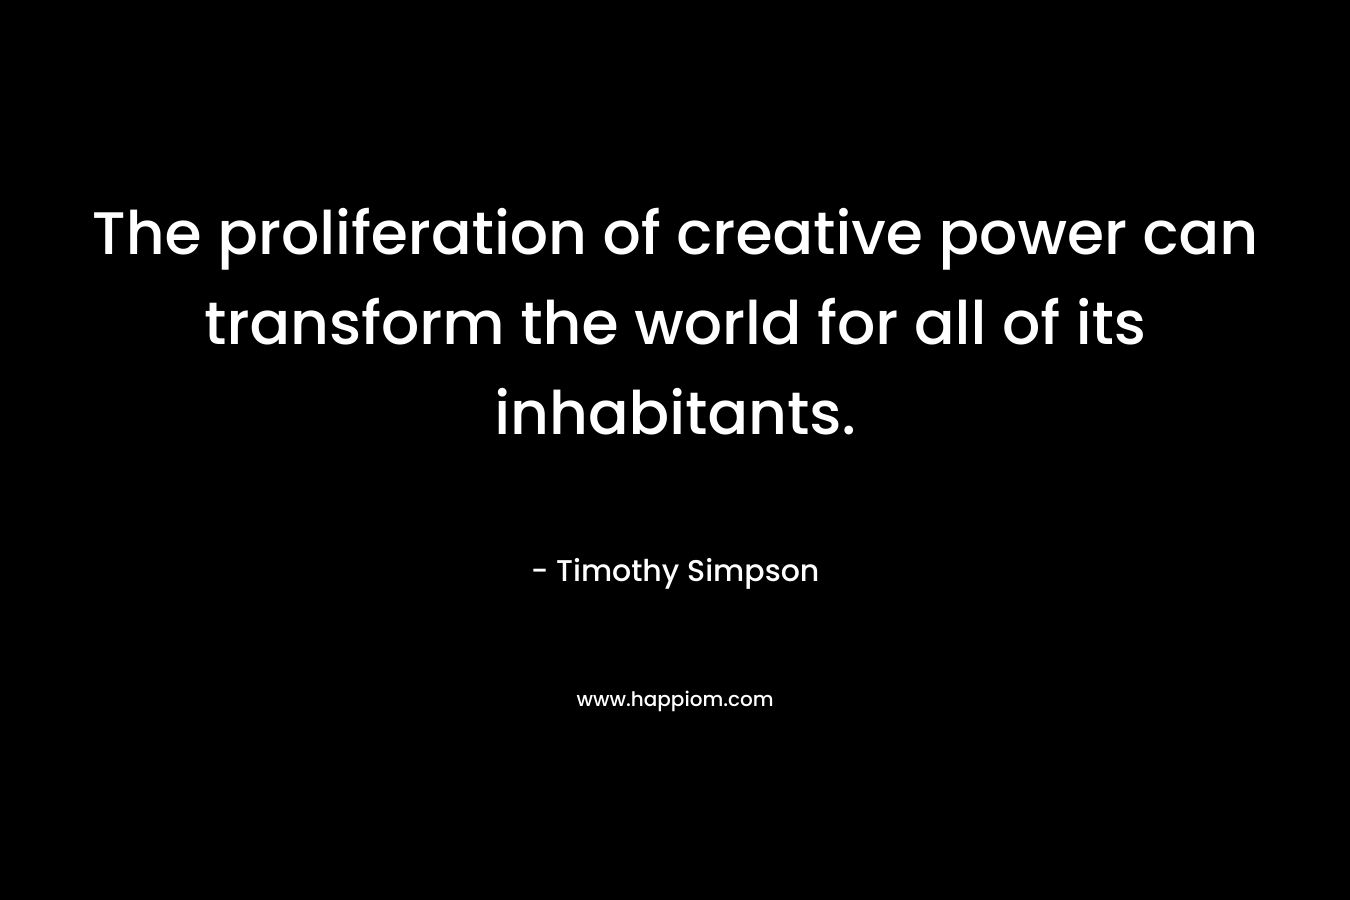 The proliferation of creative power can transform the world for all of its inhabitants.